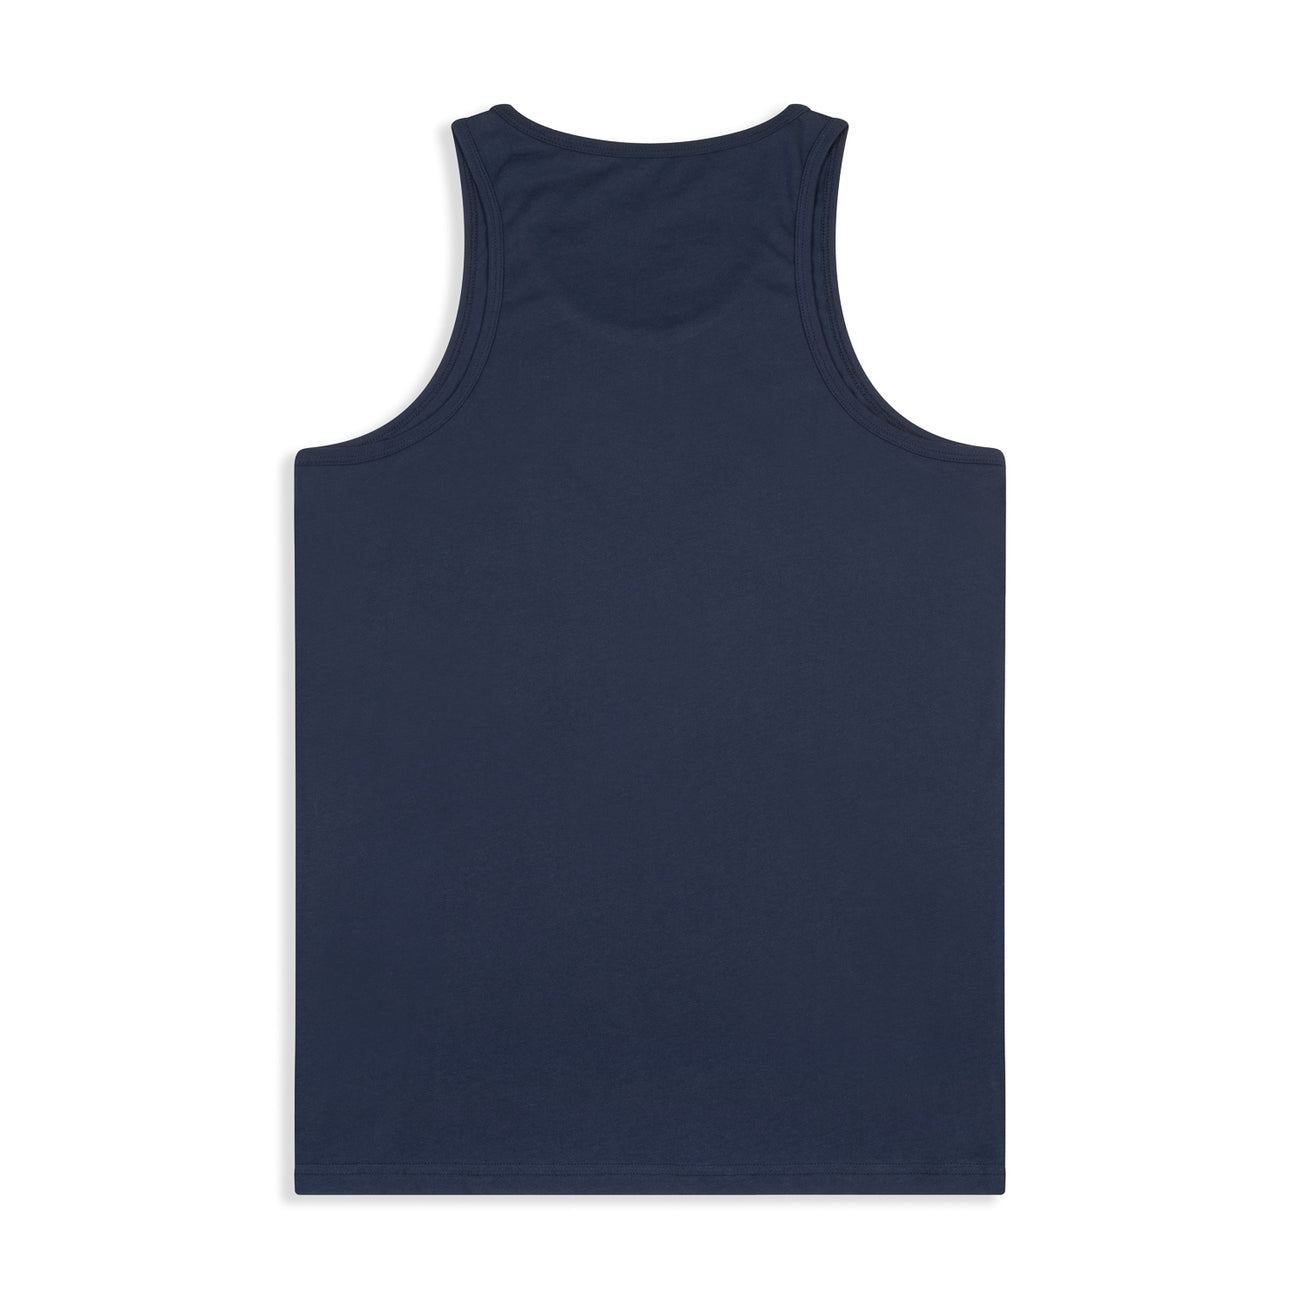 Load image into Gallery viewer, Silverstick Jersey Vest
